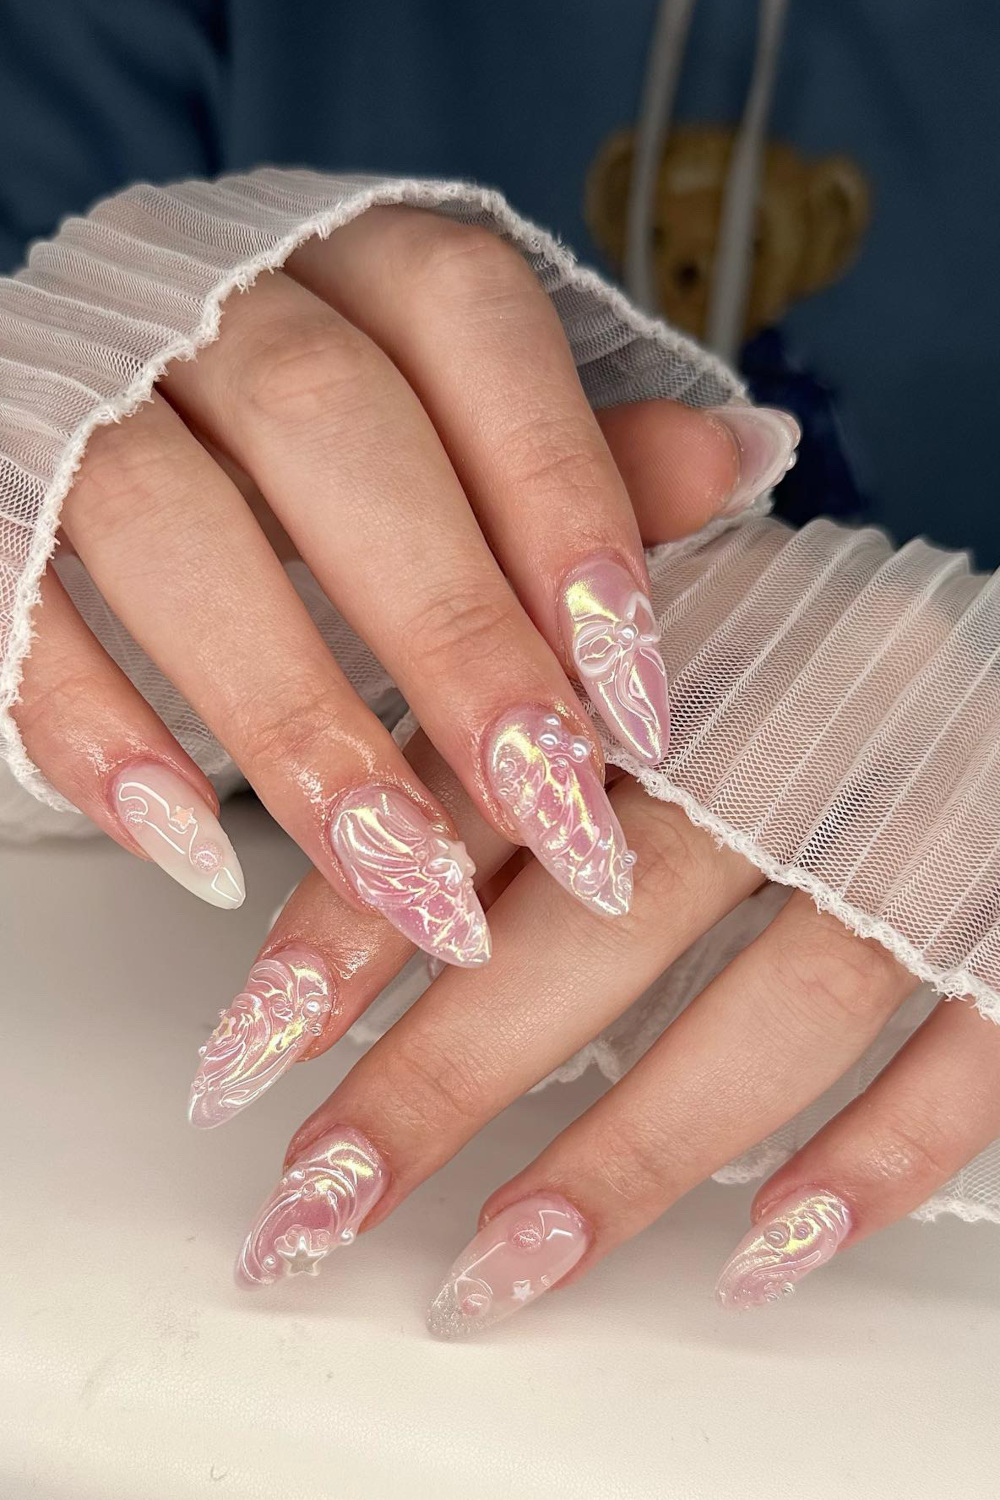 Jelly Nails Are Giving Us All The Y2K Feels